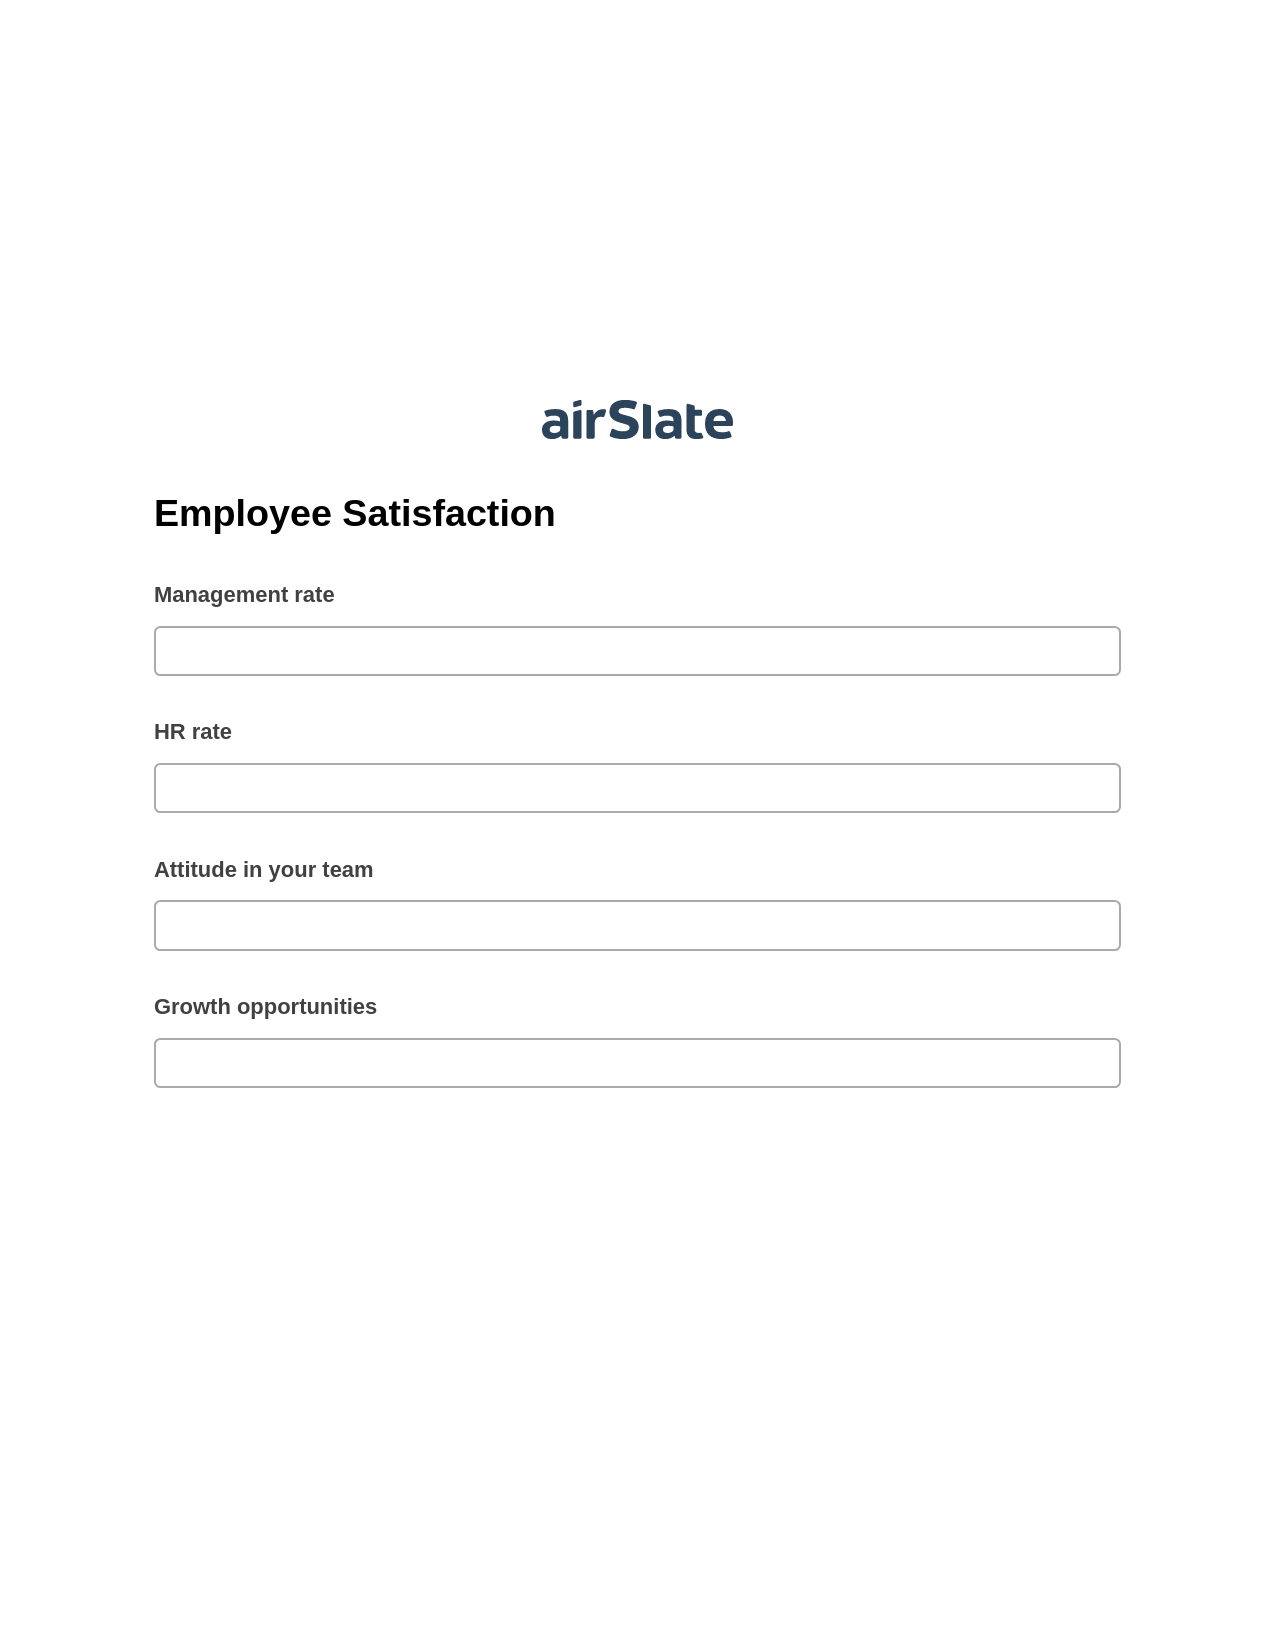 Employee Satisfaction Pre-fill from CSV File Bot, Remove Slate Bot, OneDrive Bot